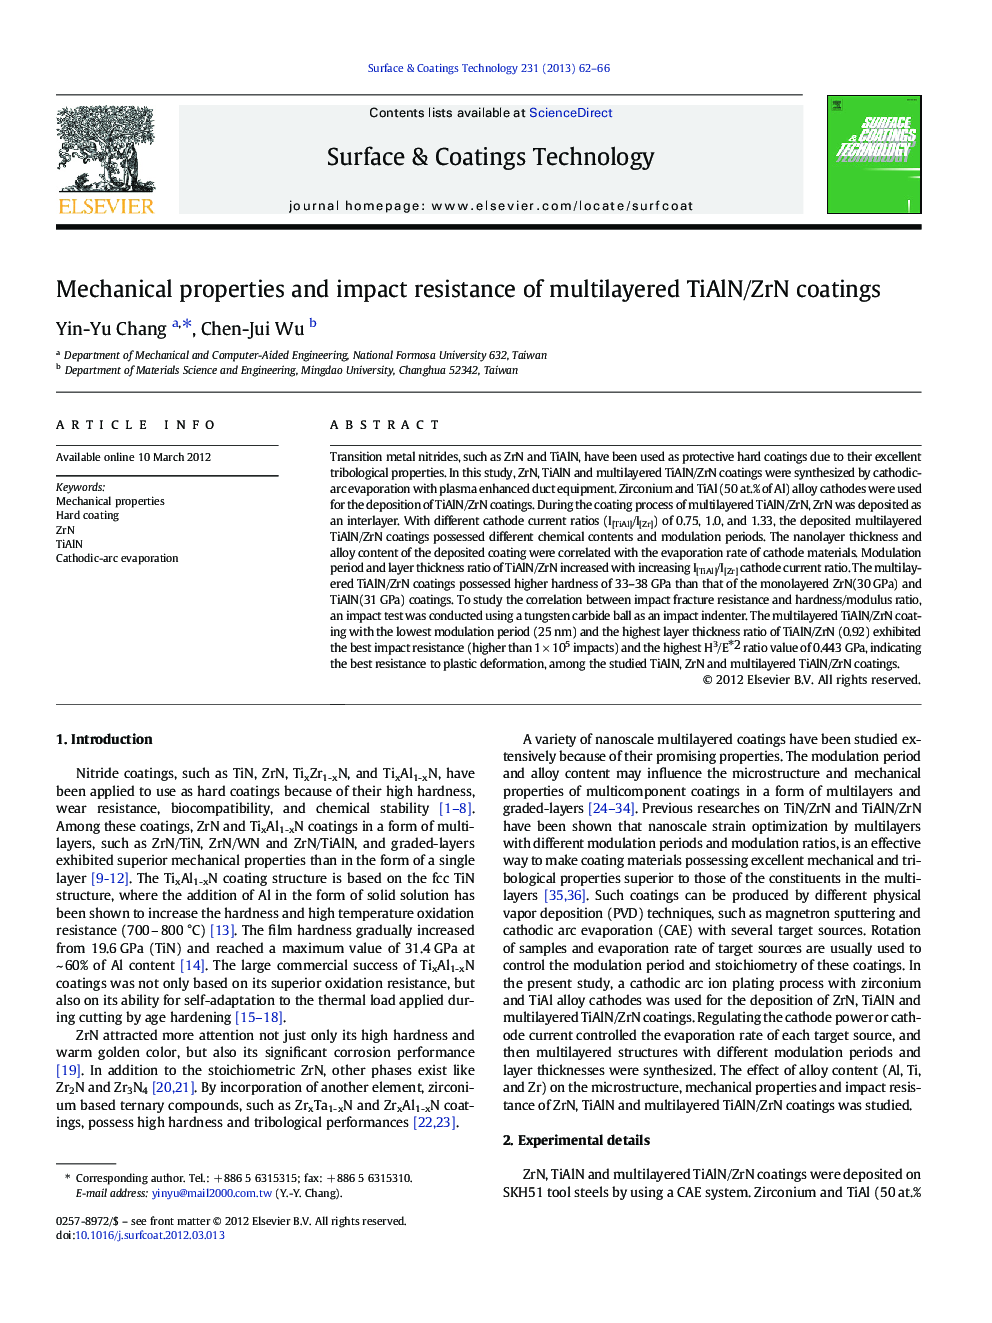 Mechanical properties and impact resistance of multilayered TiAlN/ZrN coatings